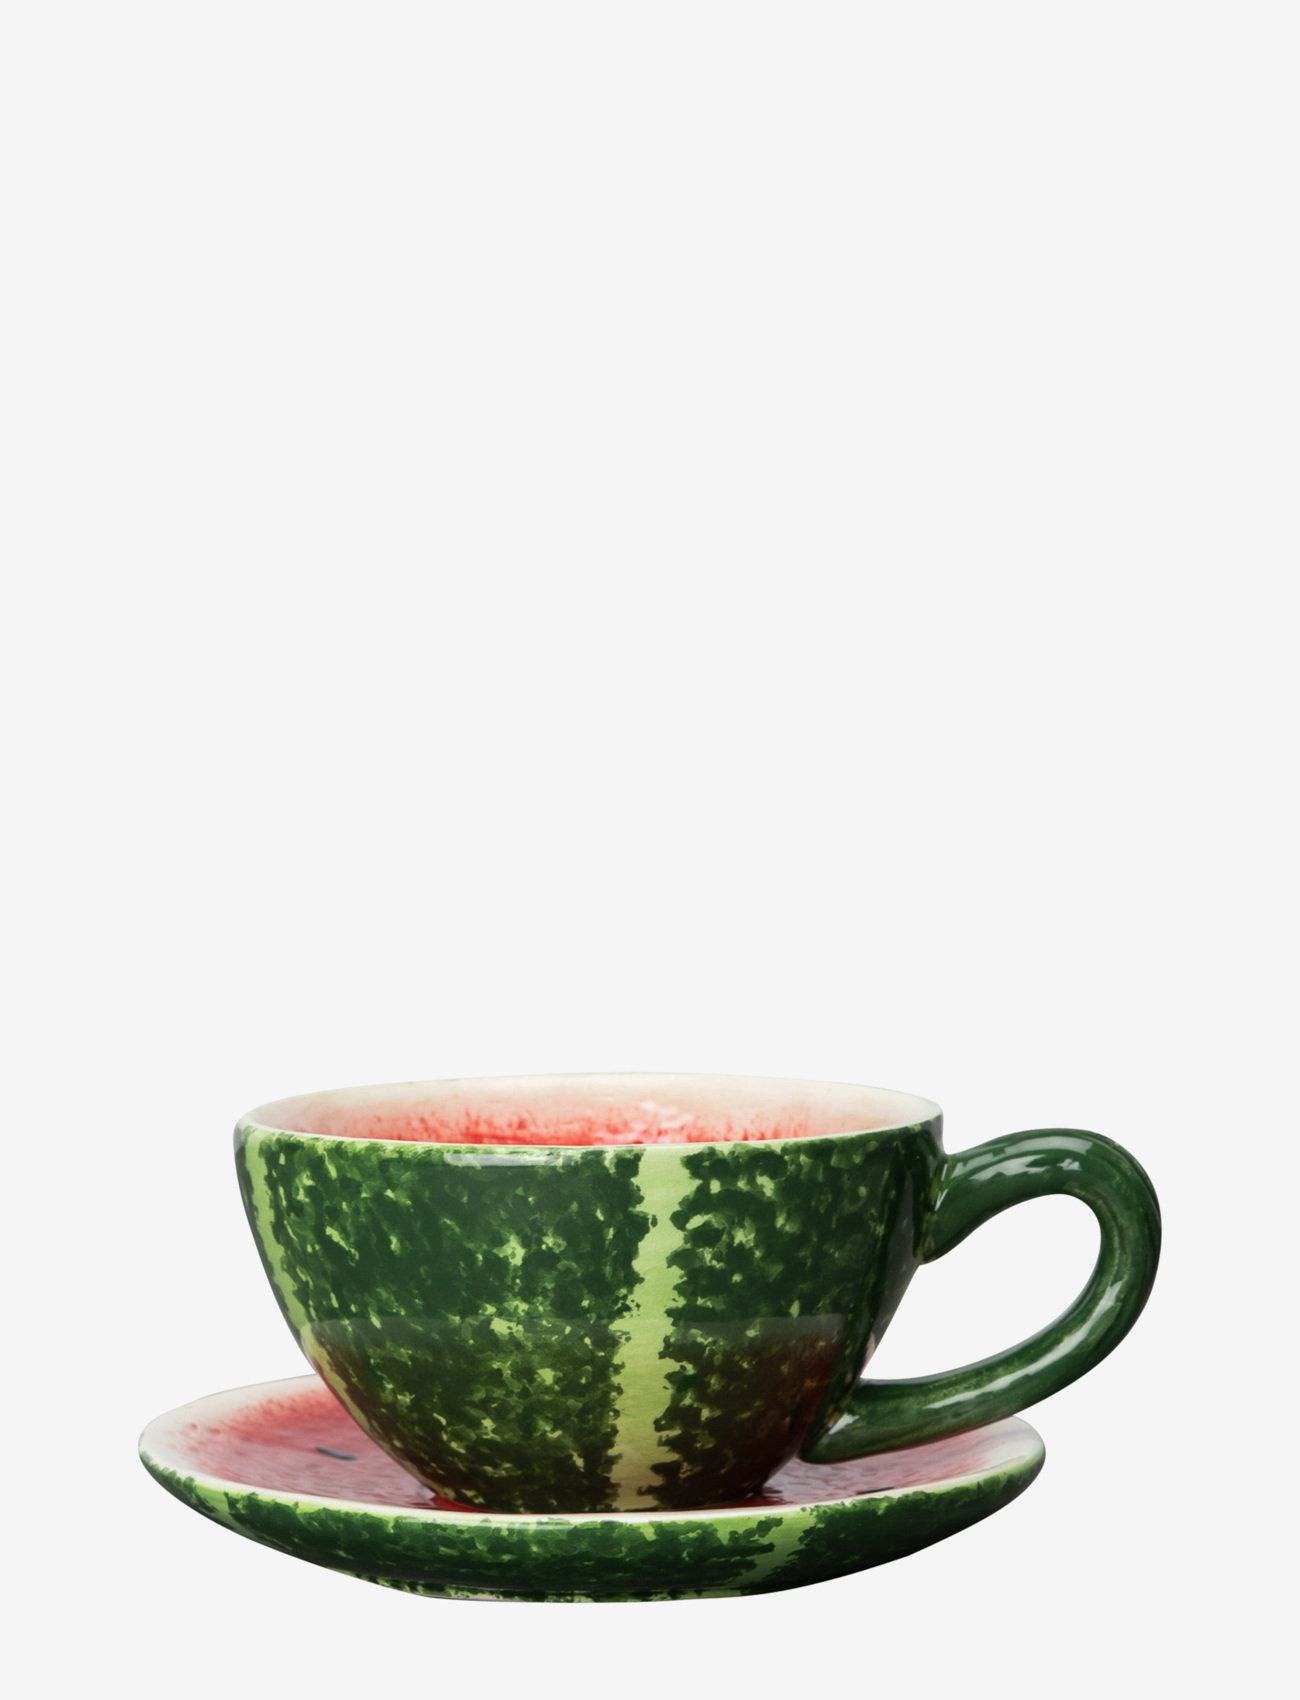 Byon Cup And Plate Watermelon Cups Mugs Boozt Com